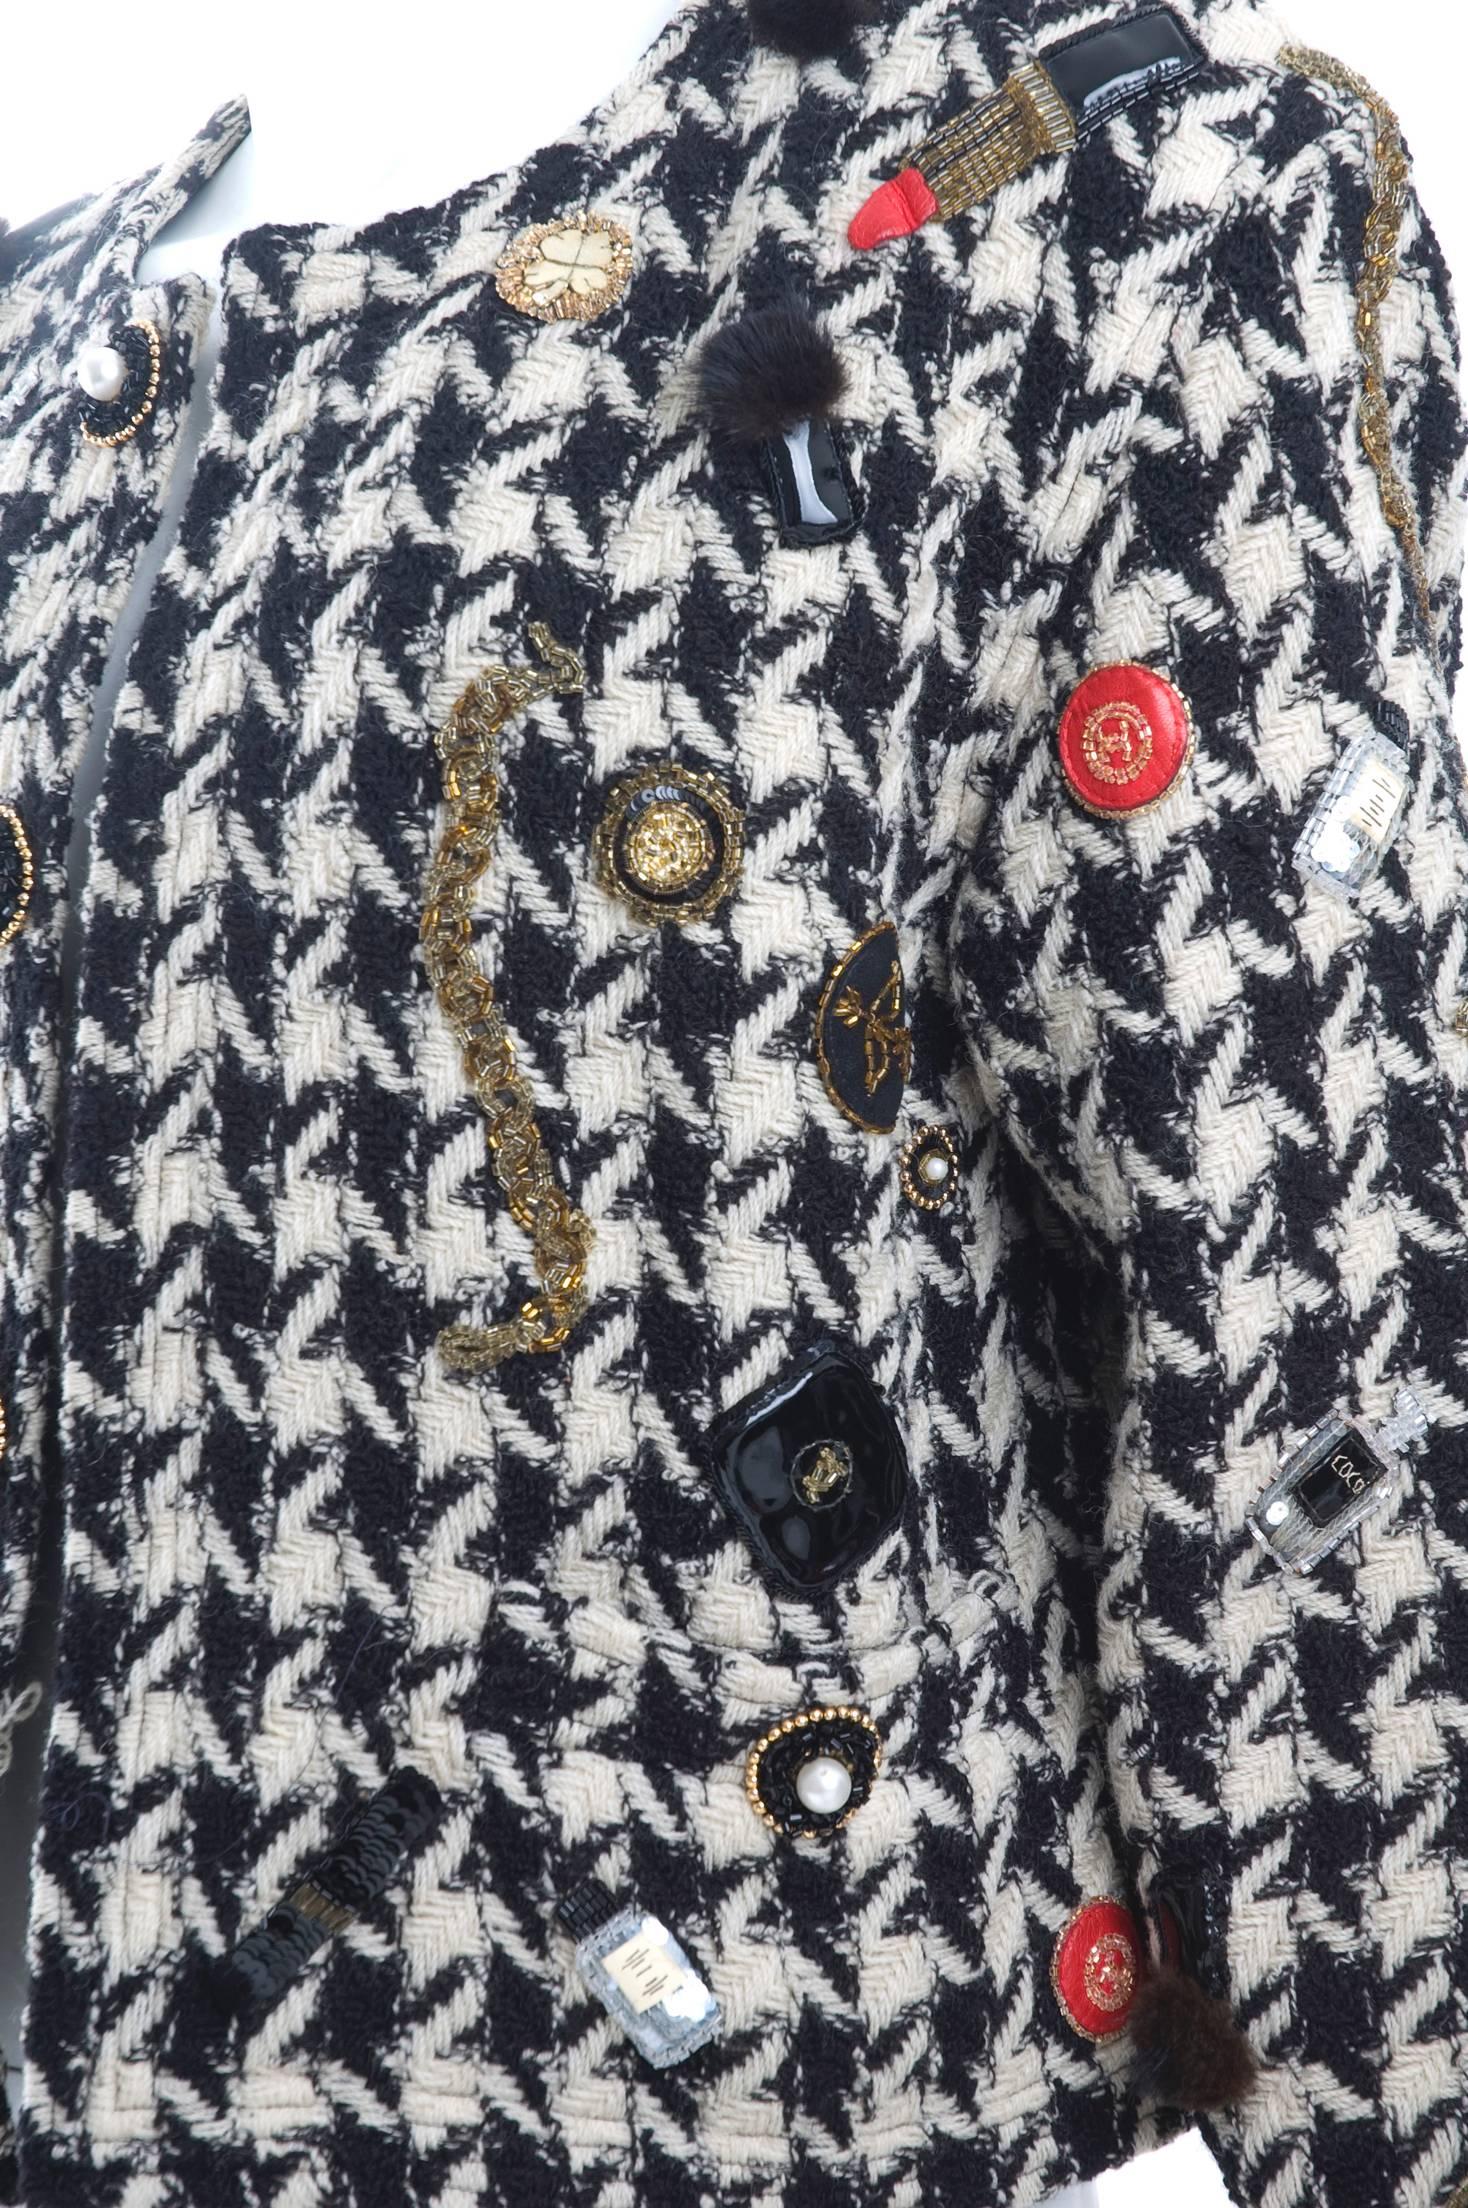 80's Rare Iconic Vintage Chanel Jacket with Jewel Appliques In Excellent Condition For Sale In Hamburg, Deutschland